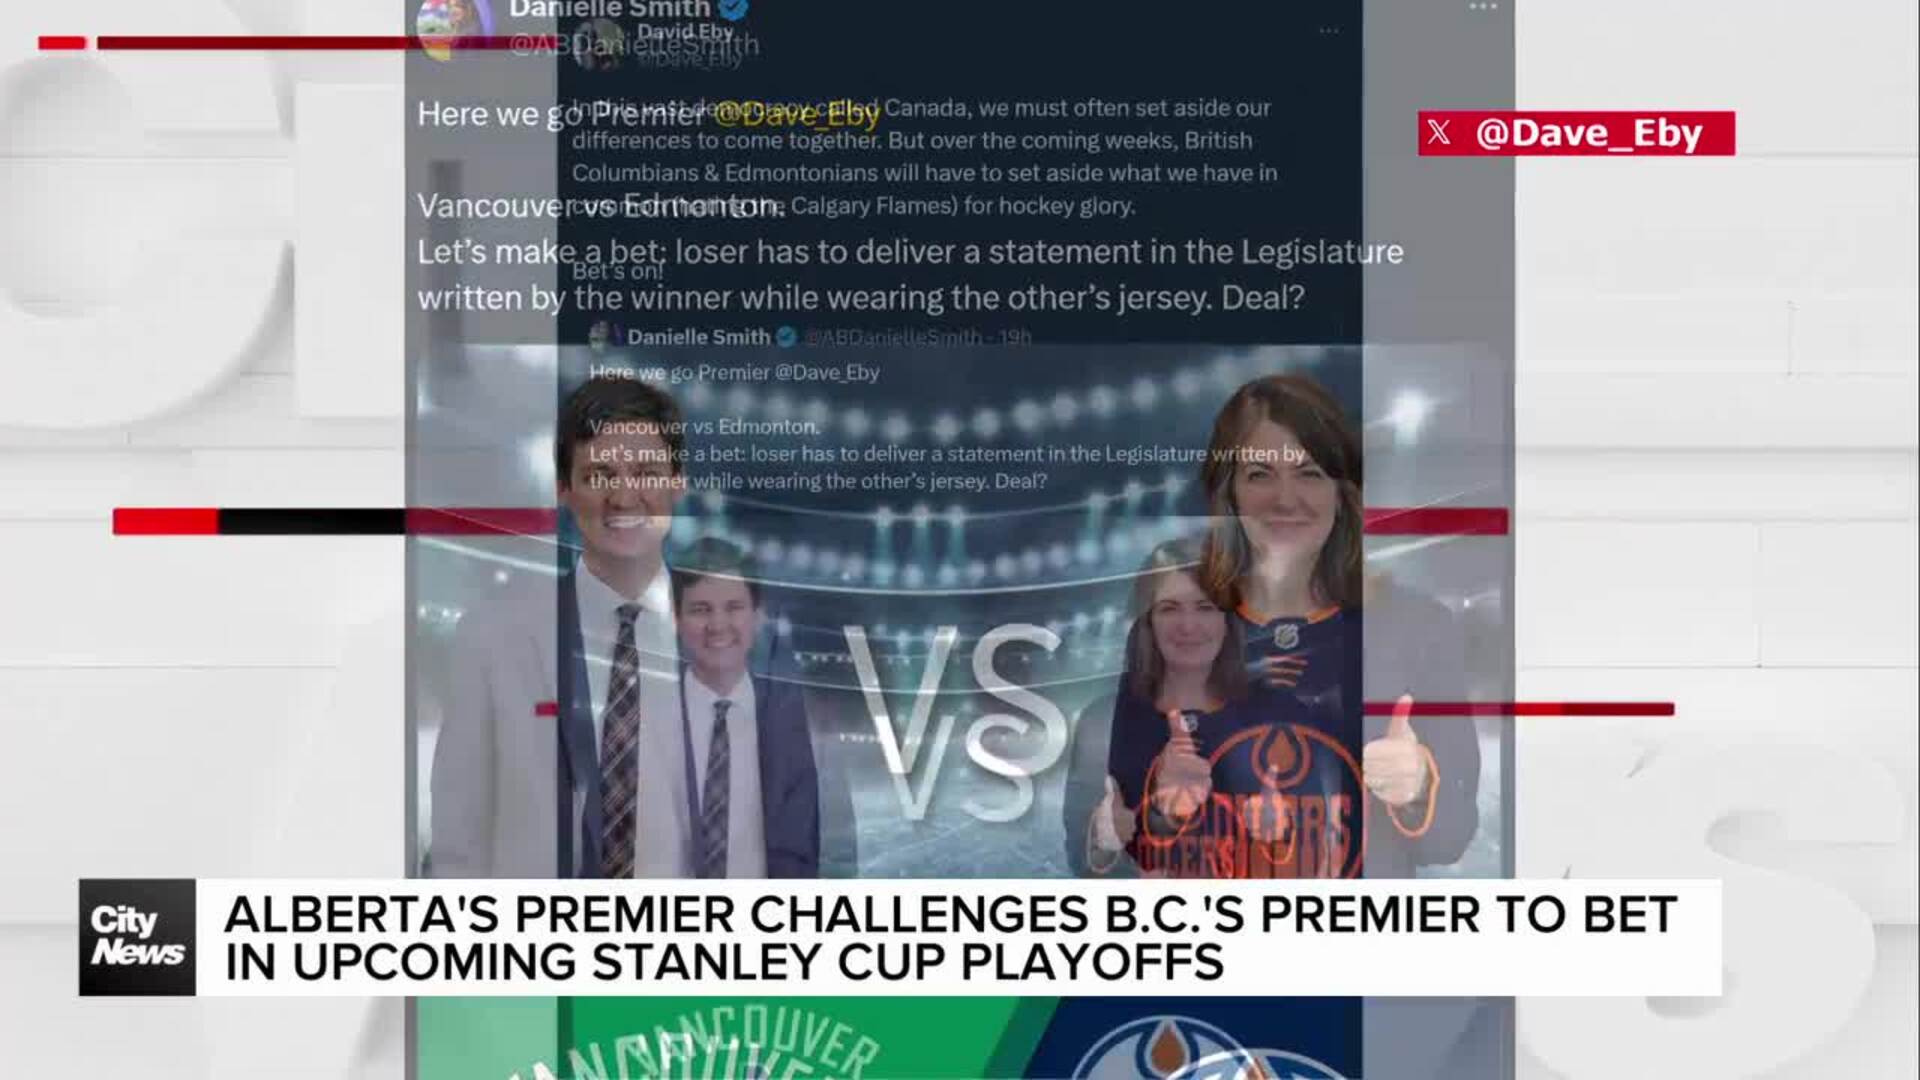 Alberta's Premier challenges B.C.'s Premier to bet in upcoming Stanley Cup playoffs